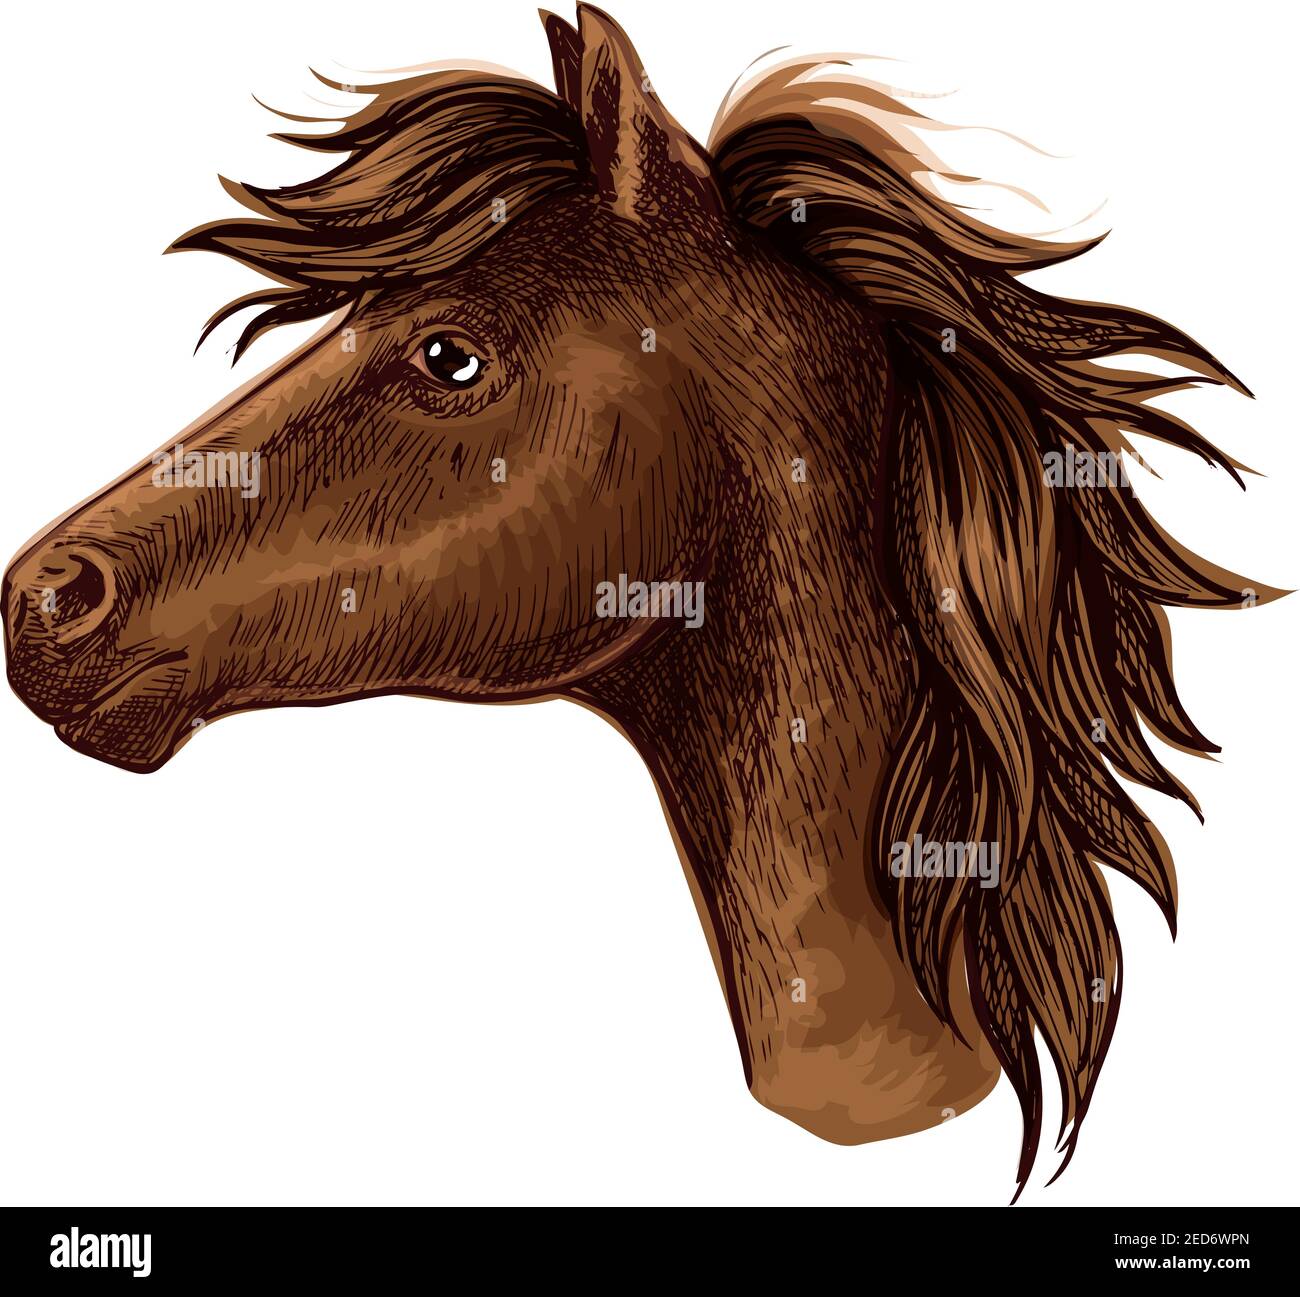 Brown arabian horse animal head. Beautiful young foal with kind eyes and spiky mane. Wild mustang stallion sketch portrait Stock Vector